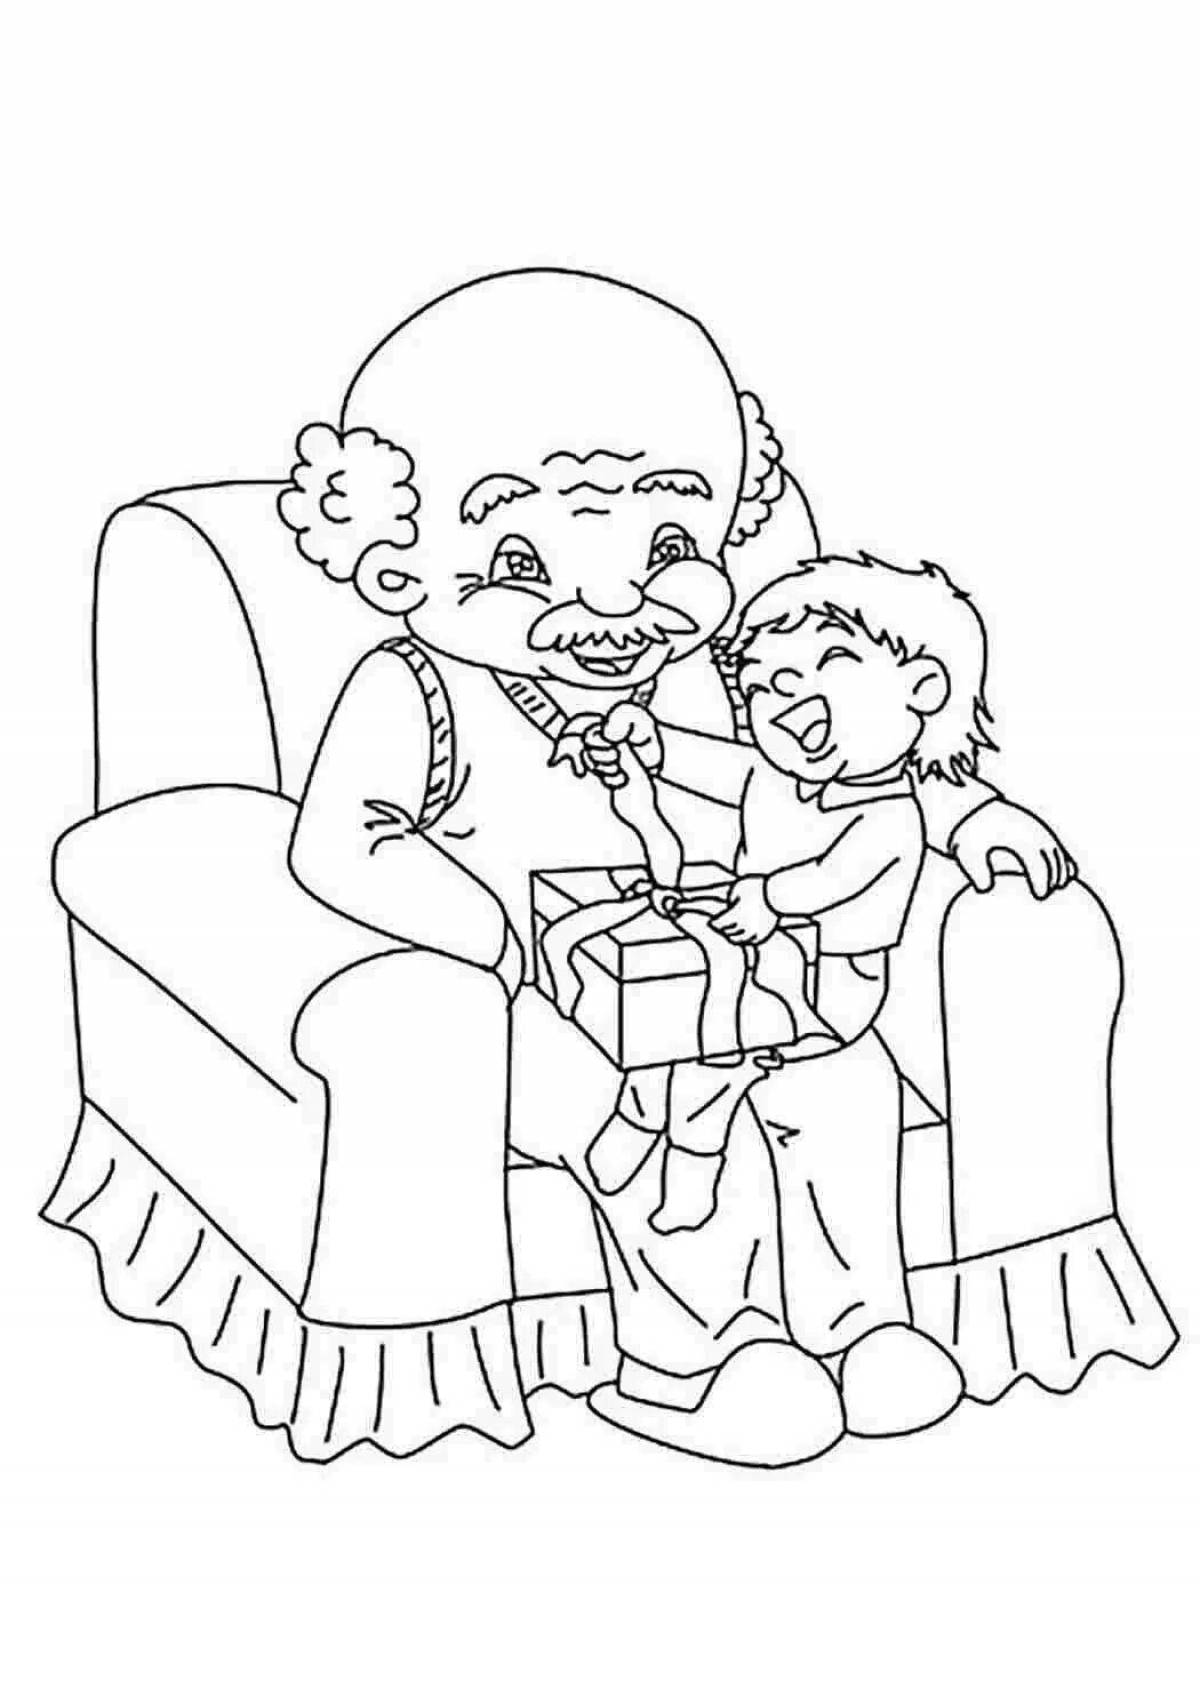 Bright coloring page postcard with grandfather